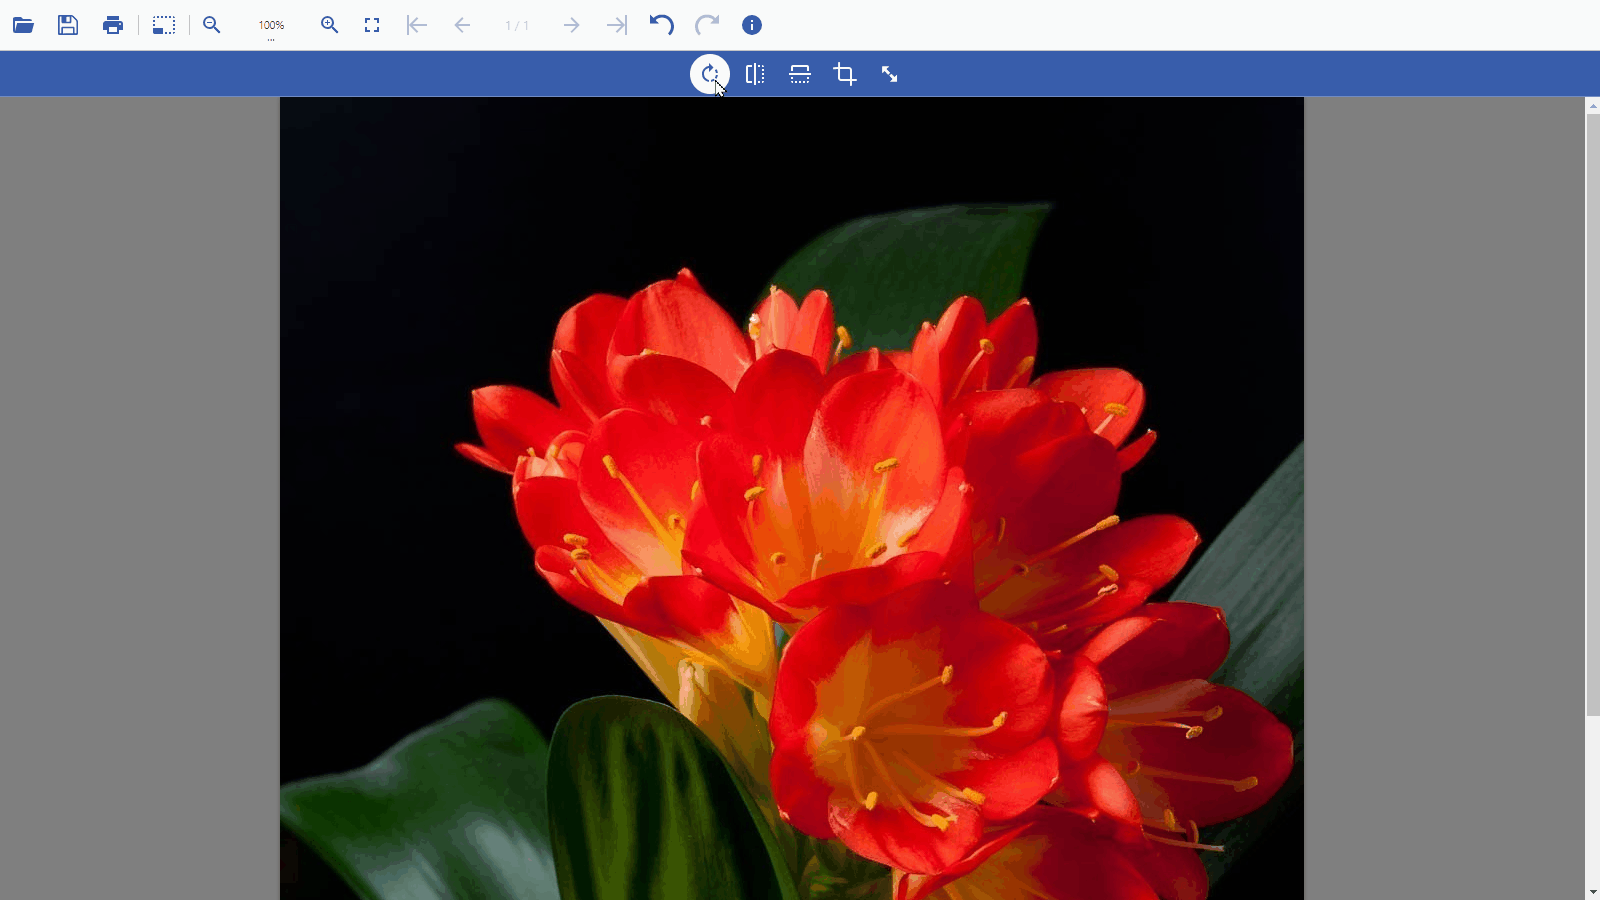 Load and Rotate Images using the DsImageViewer